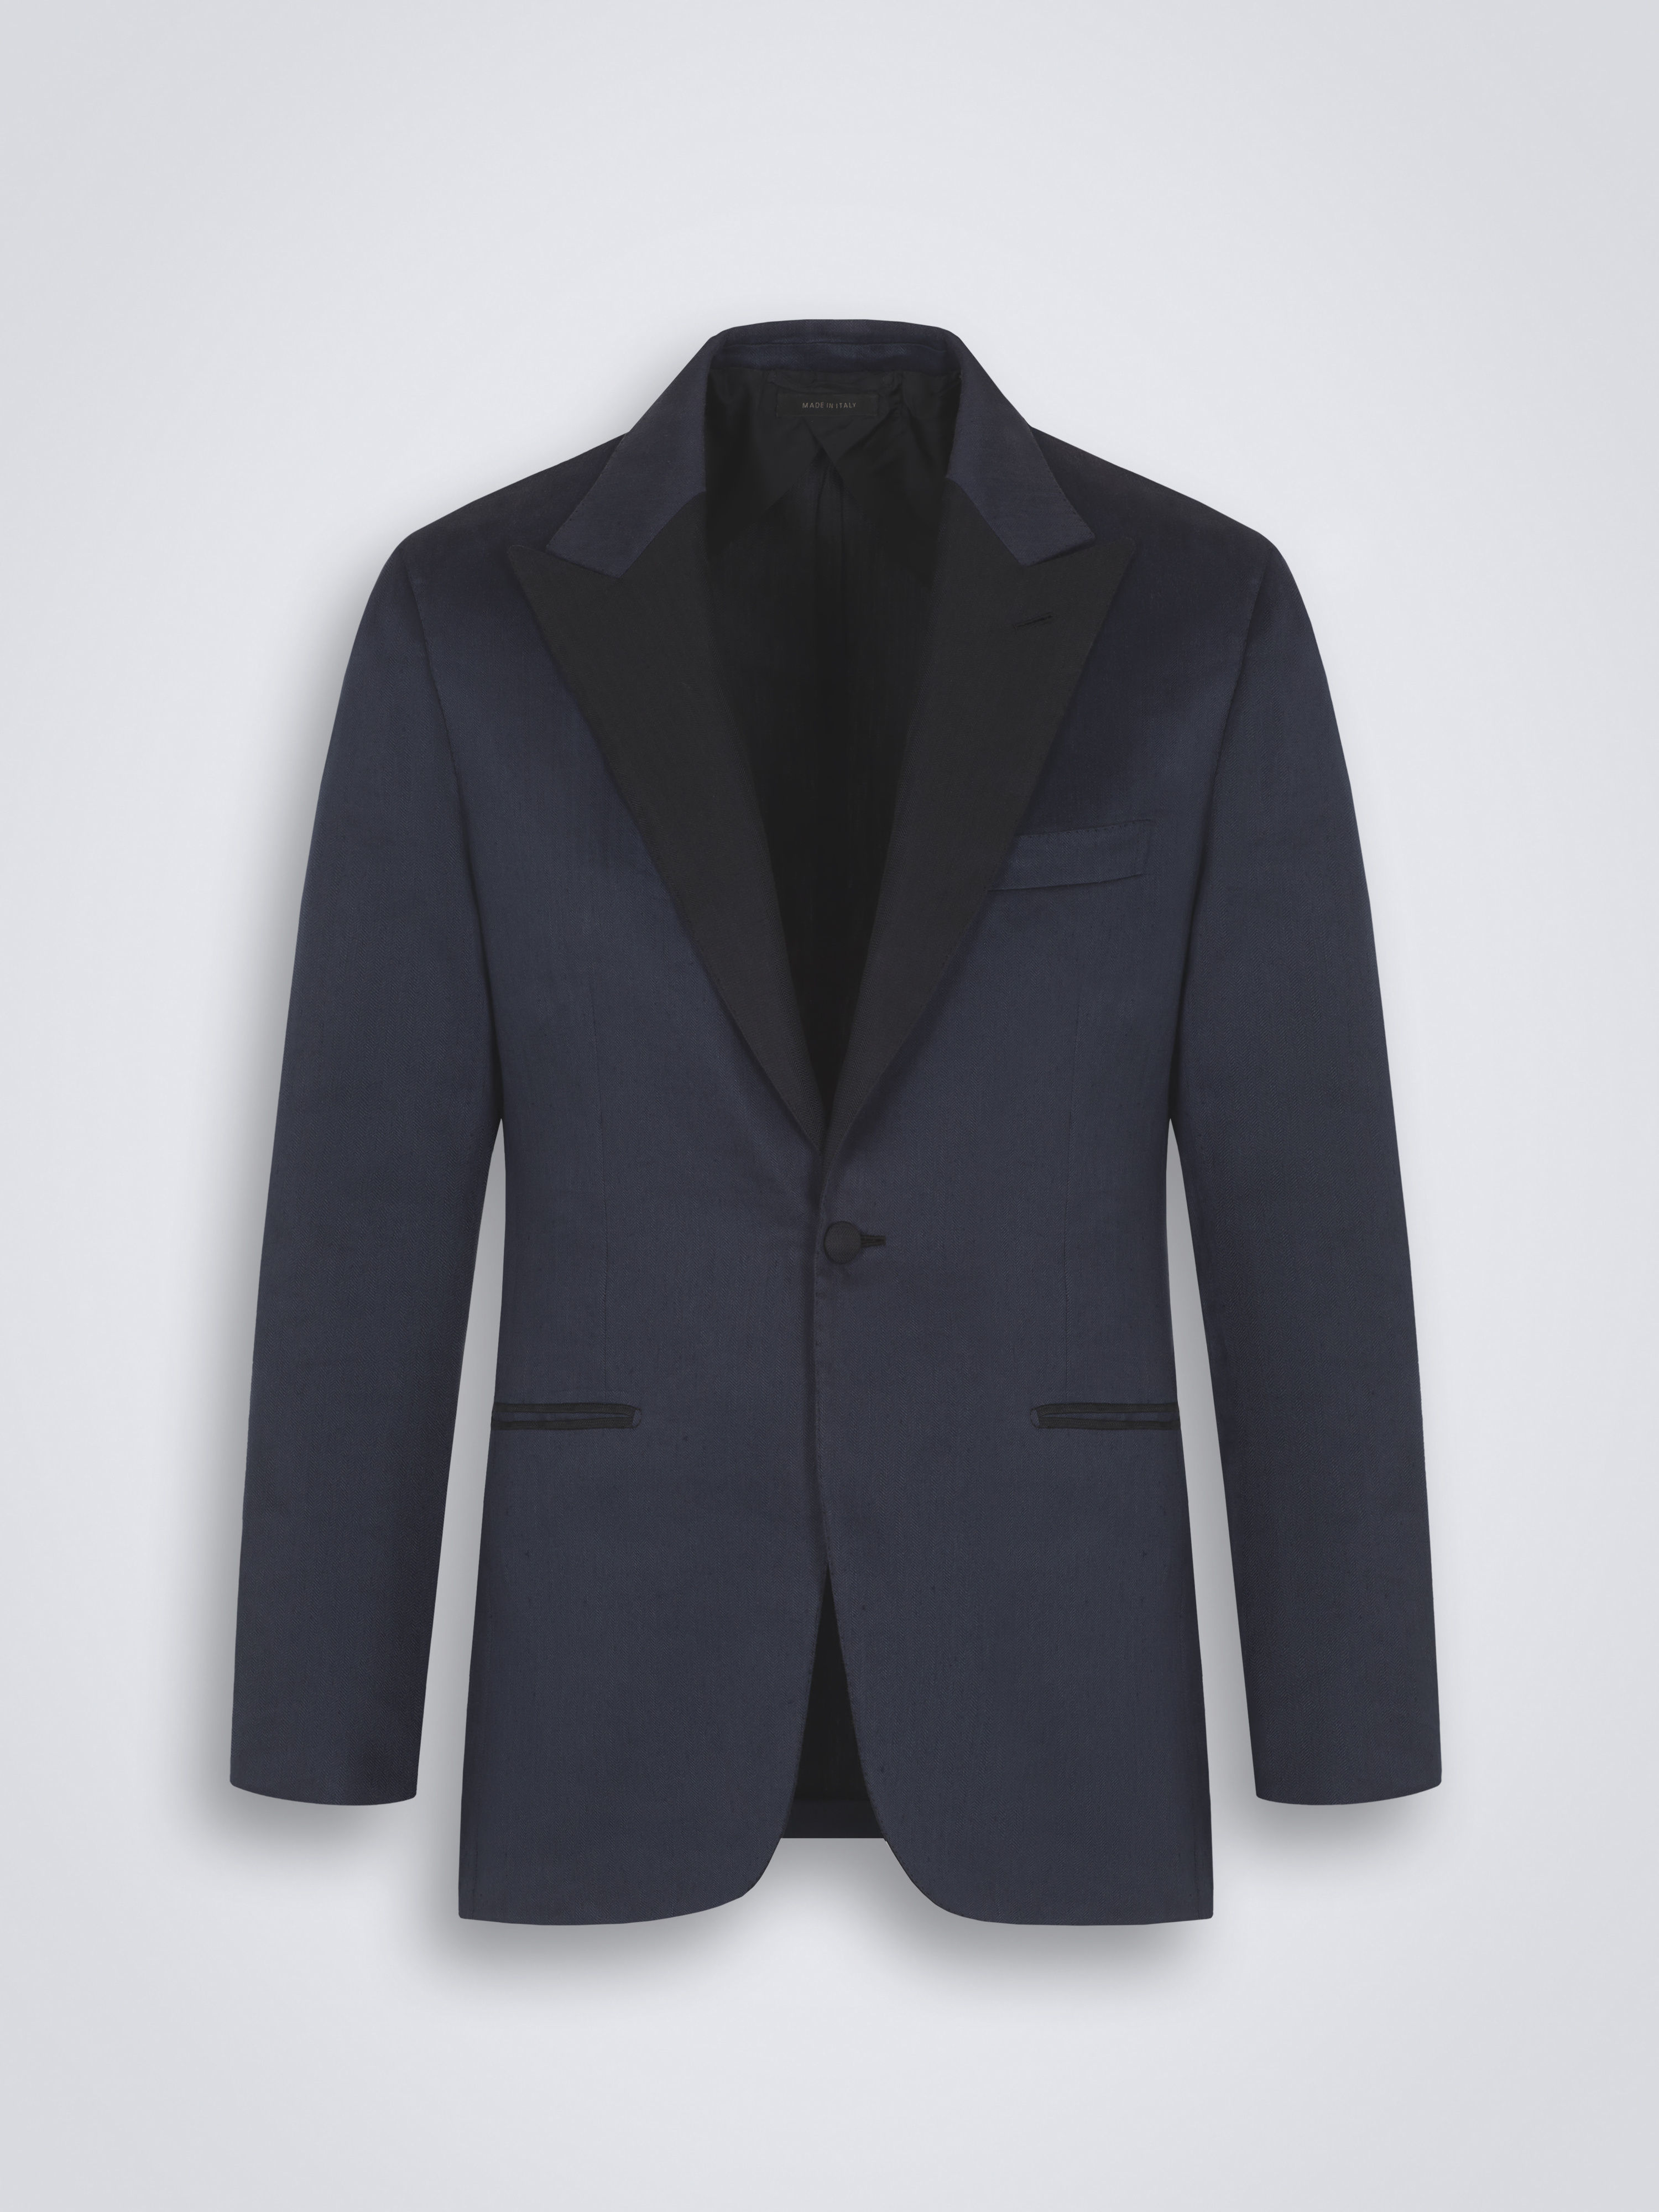 Formalwear | Brioni® RO Official Store